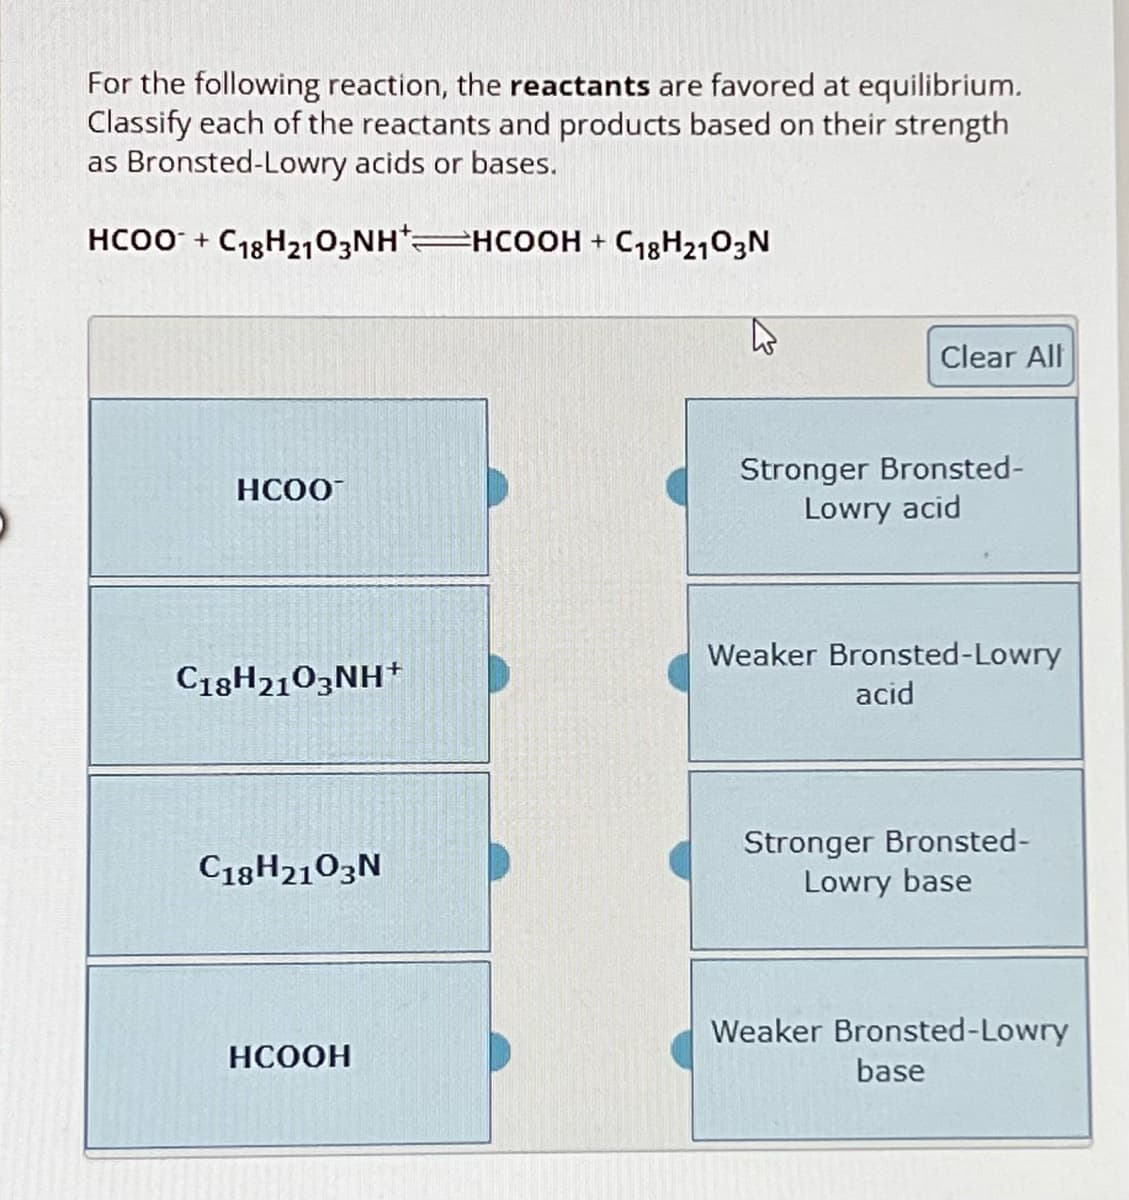 For the following reaction, the reactants are favored at equilibrium.
Classify each of the reactants and products based on their strength
as Bronsted-Lowry acids or bases.
HCOO- + C18H2103NH*—HCOOH + CgHz1O3N
HCOO
Clear All
Stronger Bronsted-
Lowry acid
Weaker Bronsted-Lowry
C18H2103NH+
acid
C18H2103N
Stronger Bronsted-
Lowry base
Weaker Bronsted-Lowry
HCOOH
base